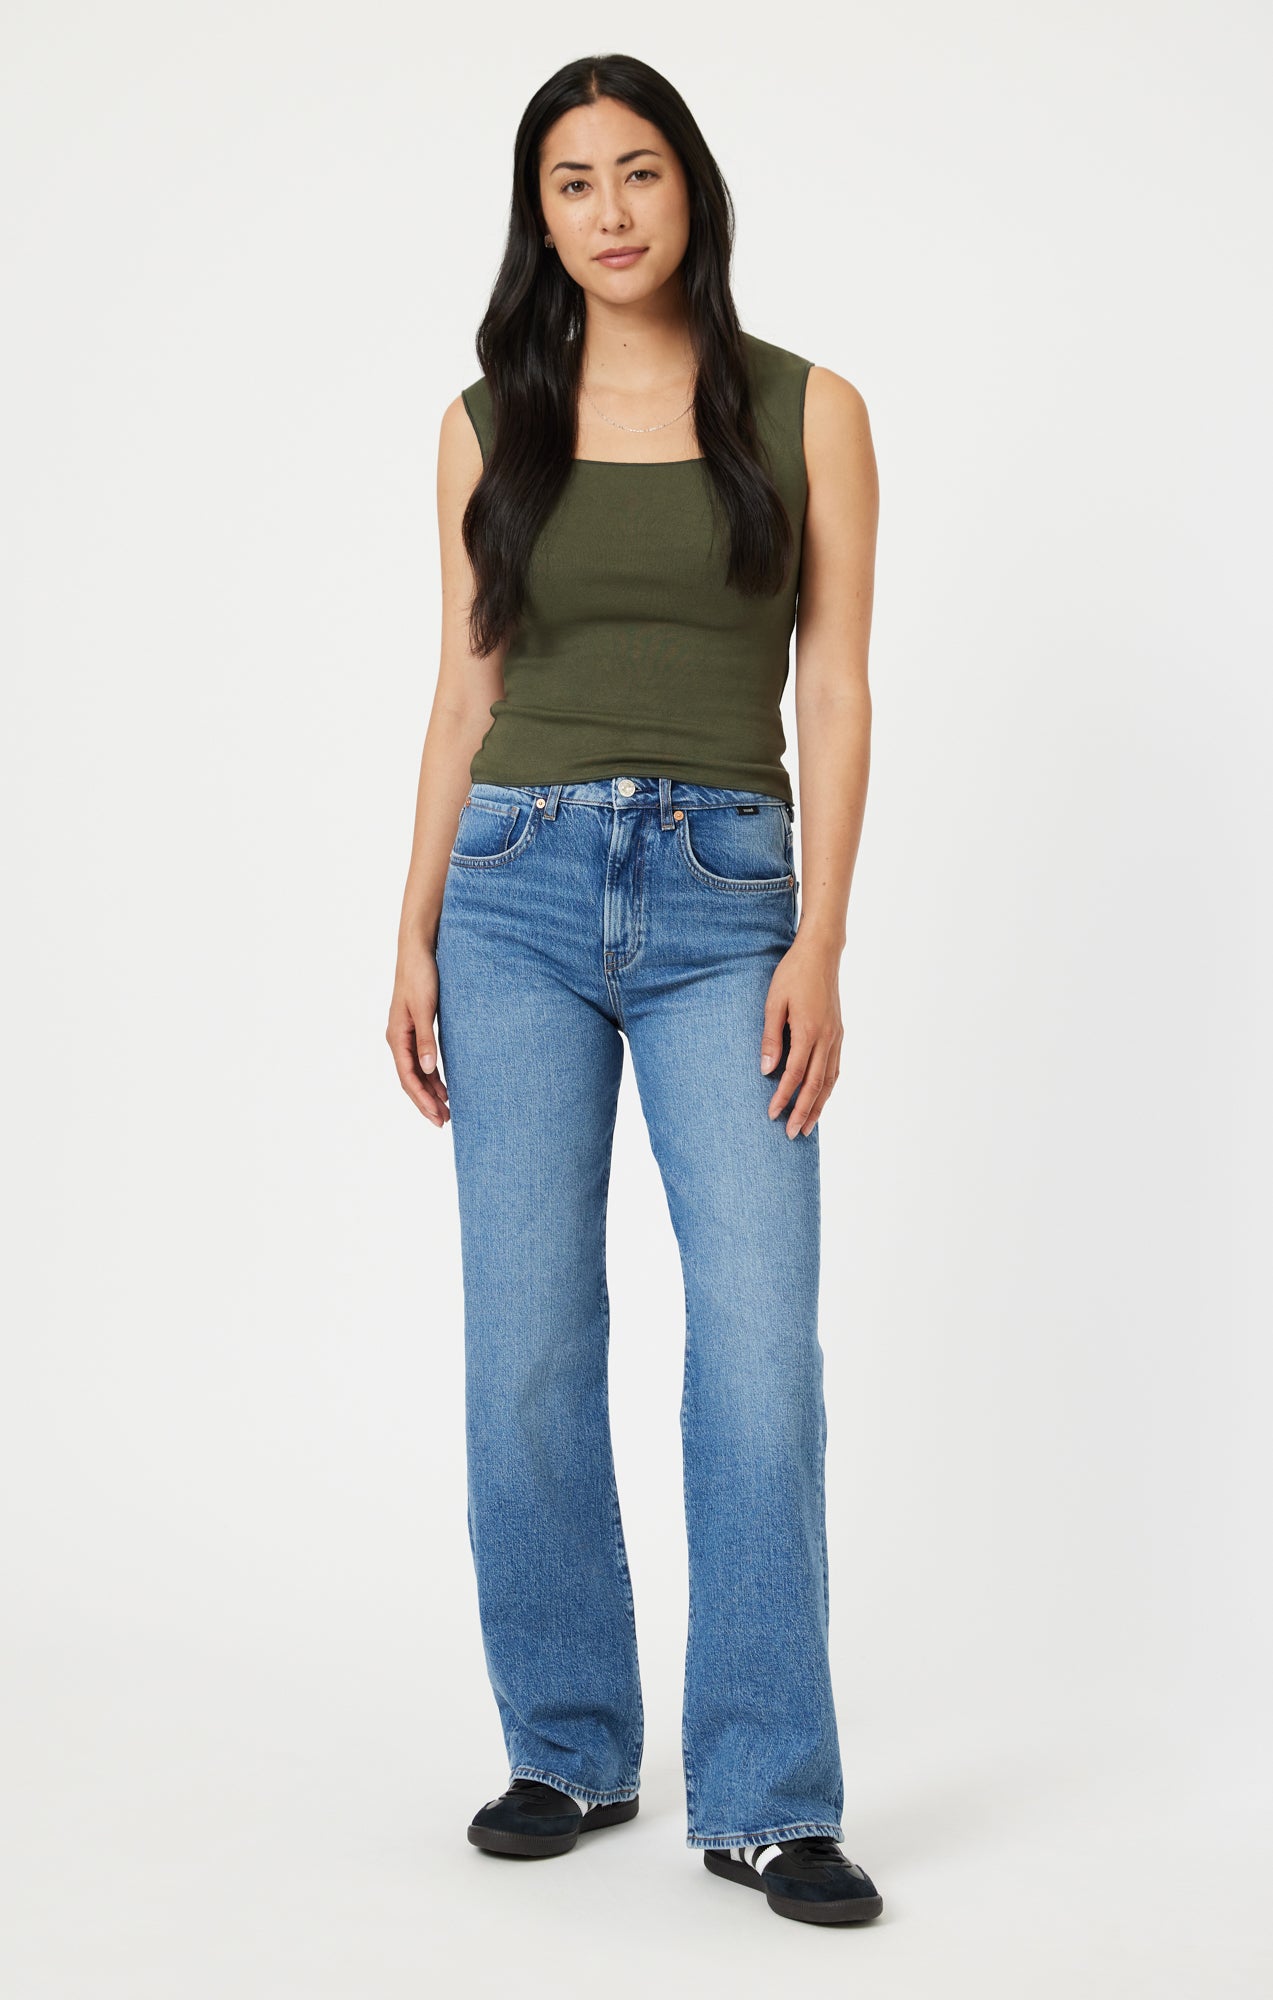 High Rise Jeans - High Rise Pants & Super High Waisted Jeans